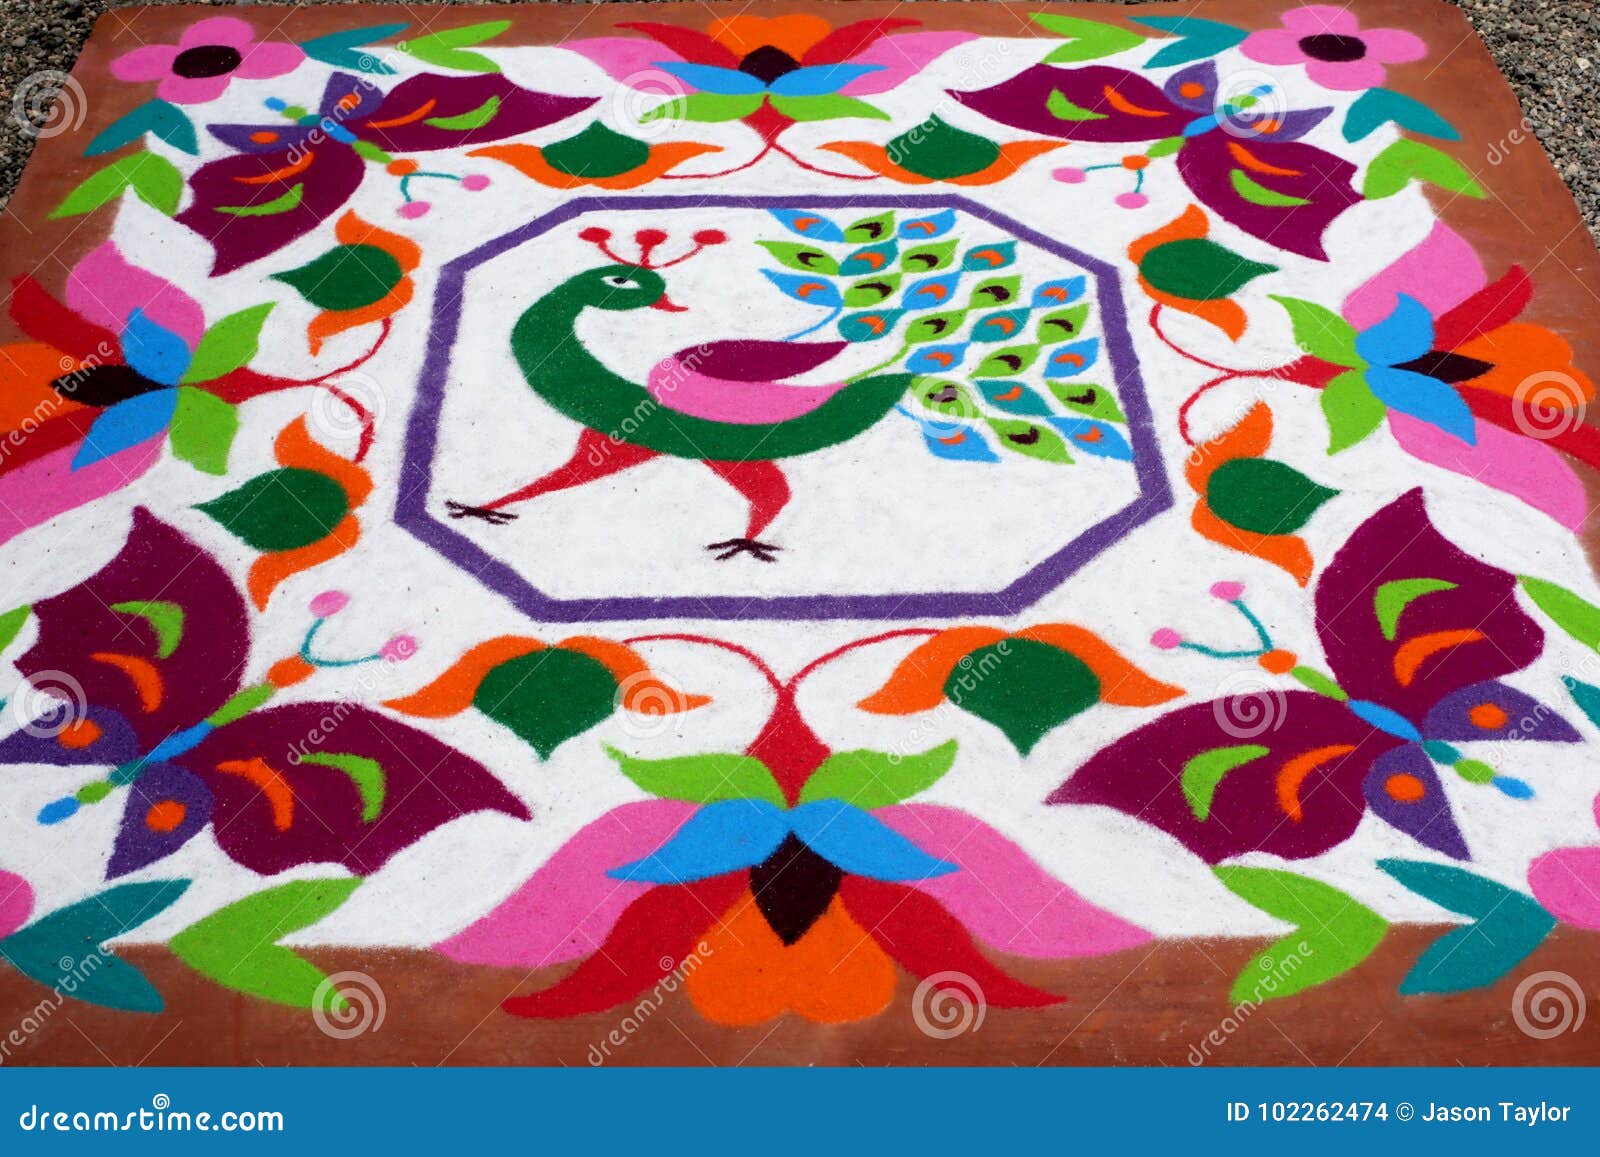 Colourful Rangoli Traditional Floral Design Made with Dry Powdered ...